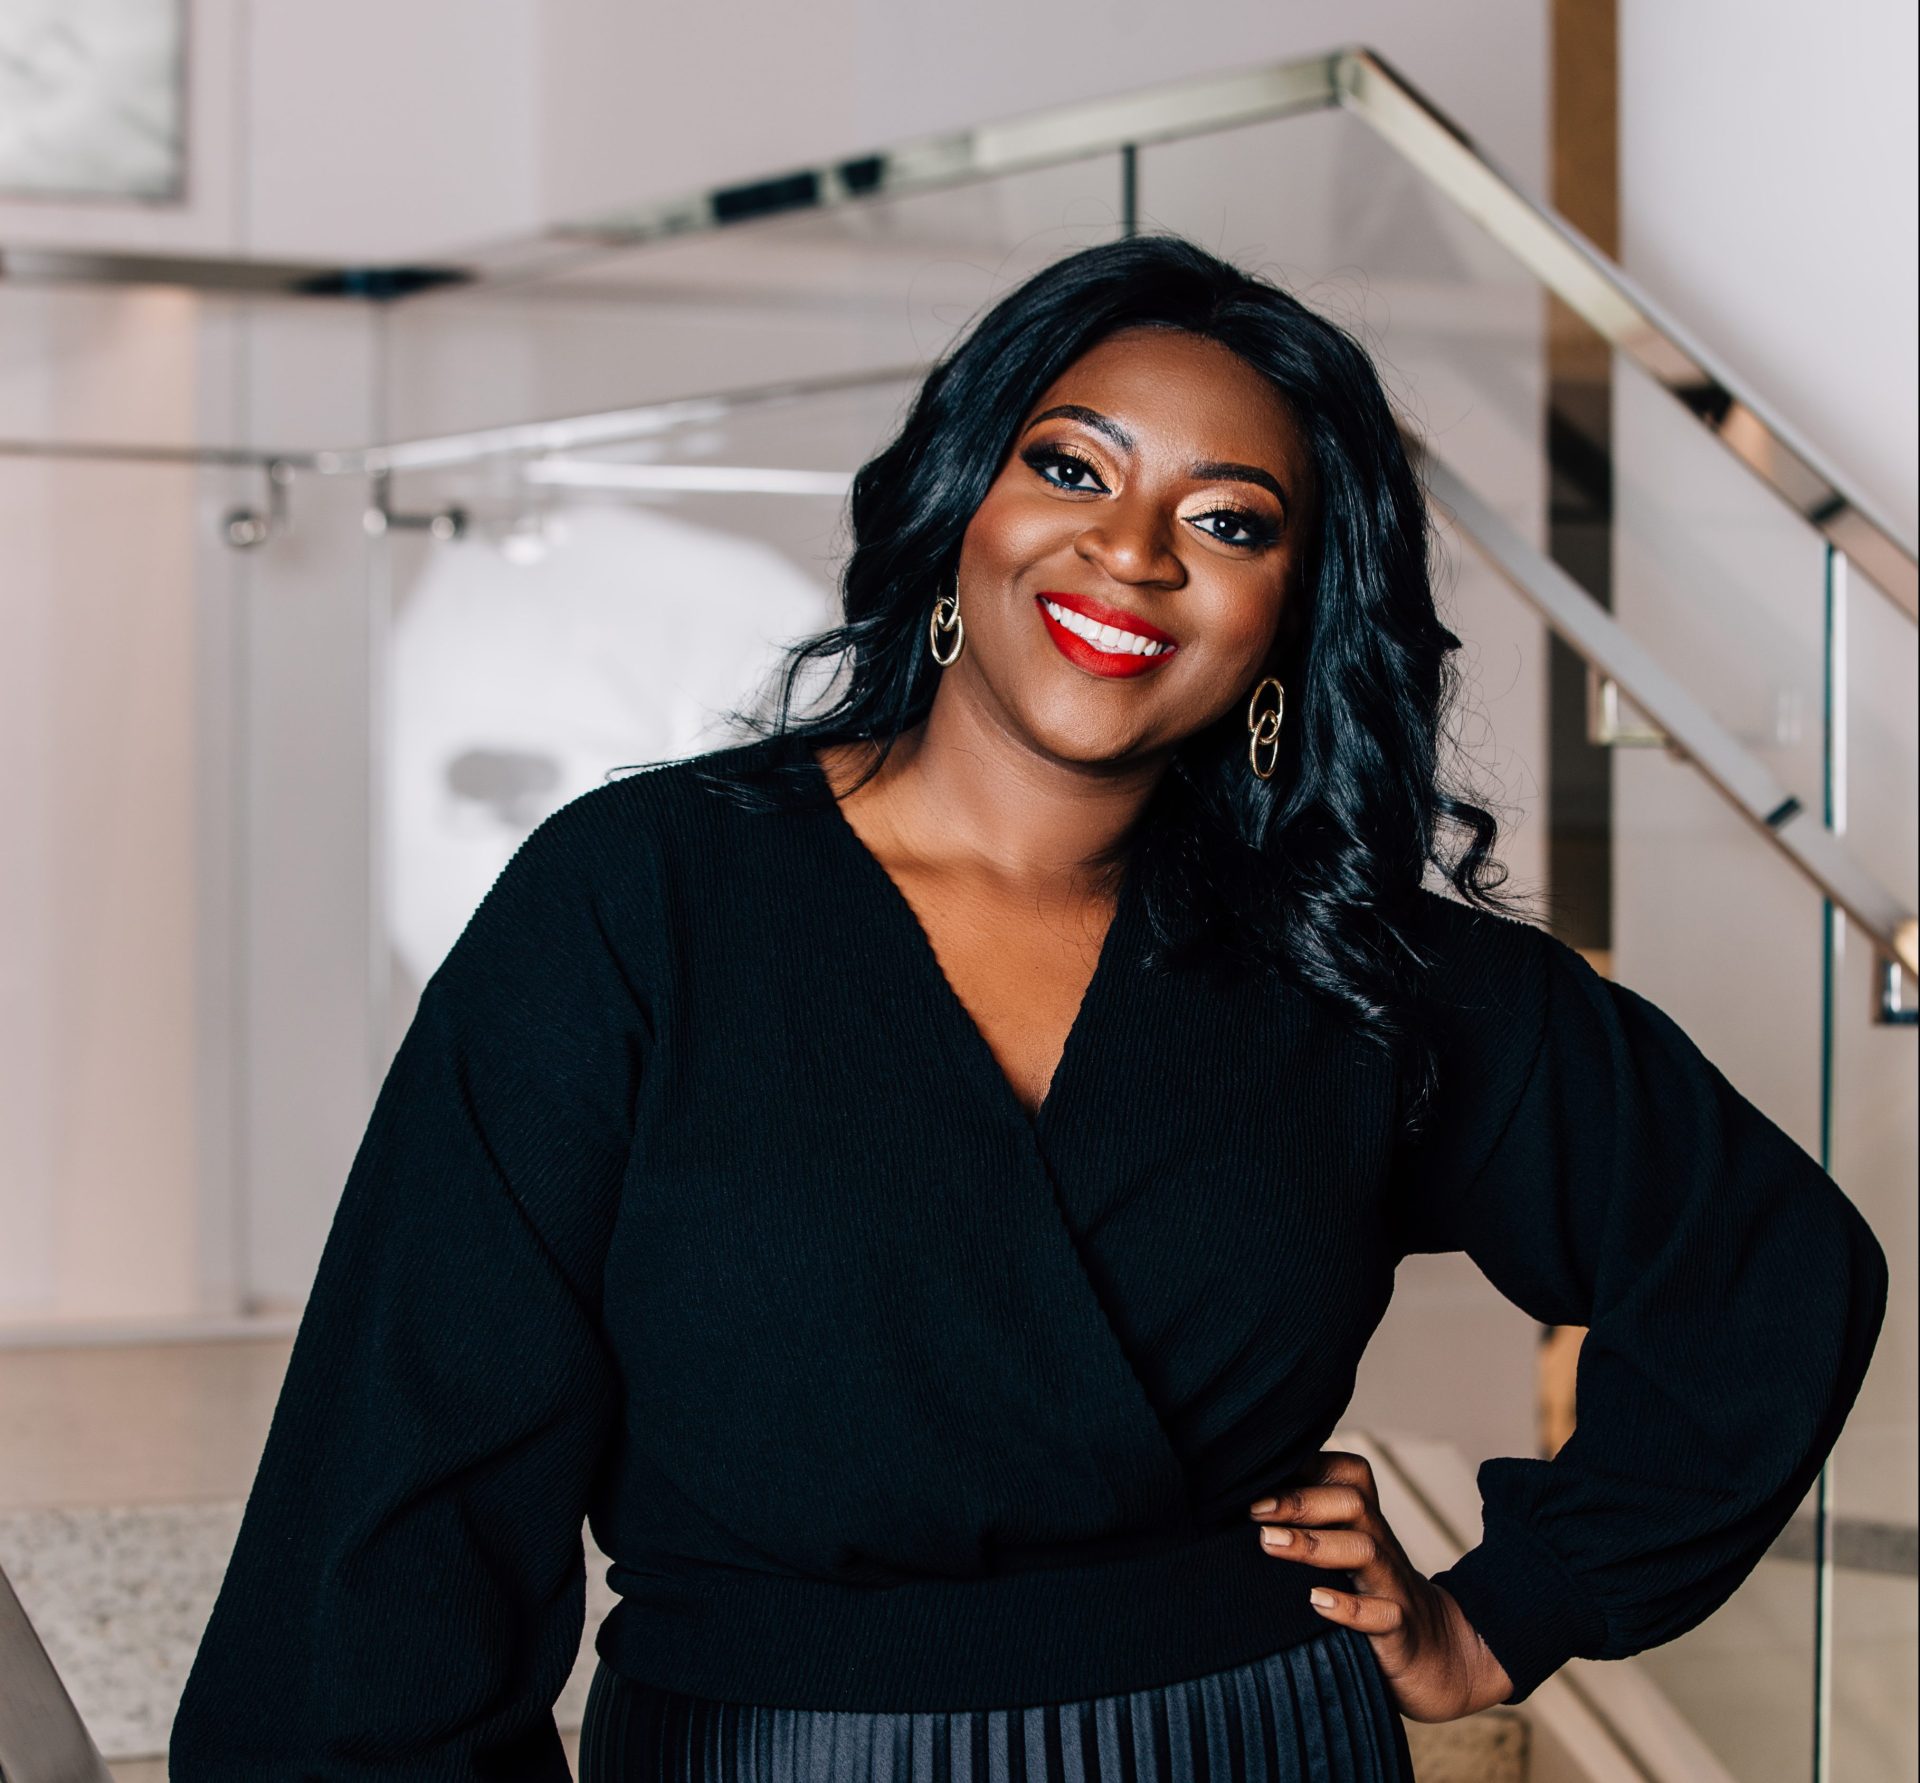 Ezinne Kwubiri challenges her team to be change agents for H&M